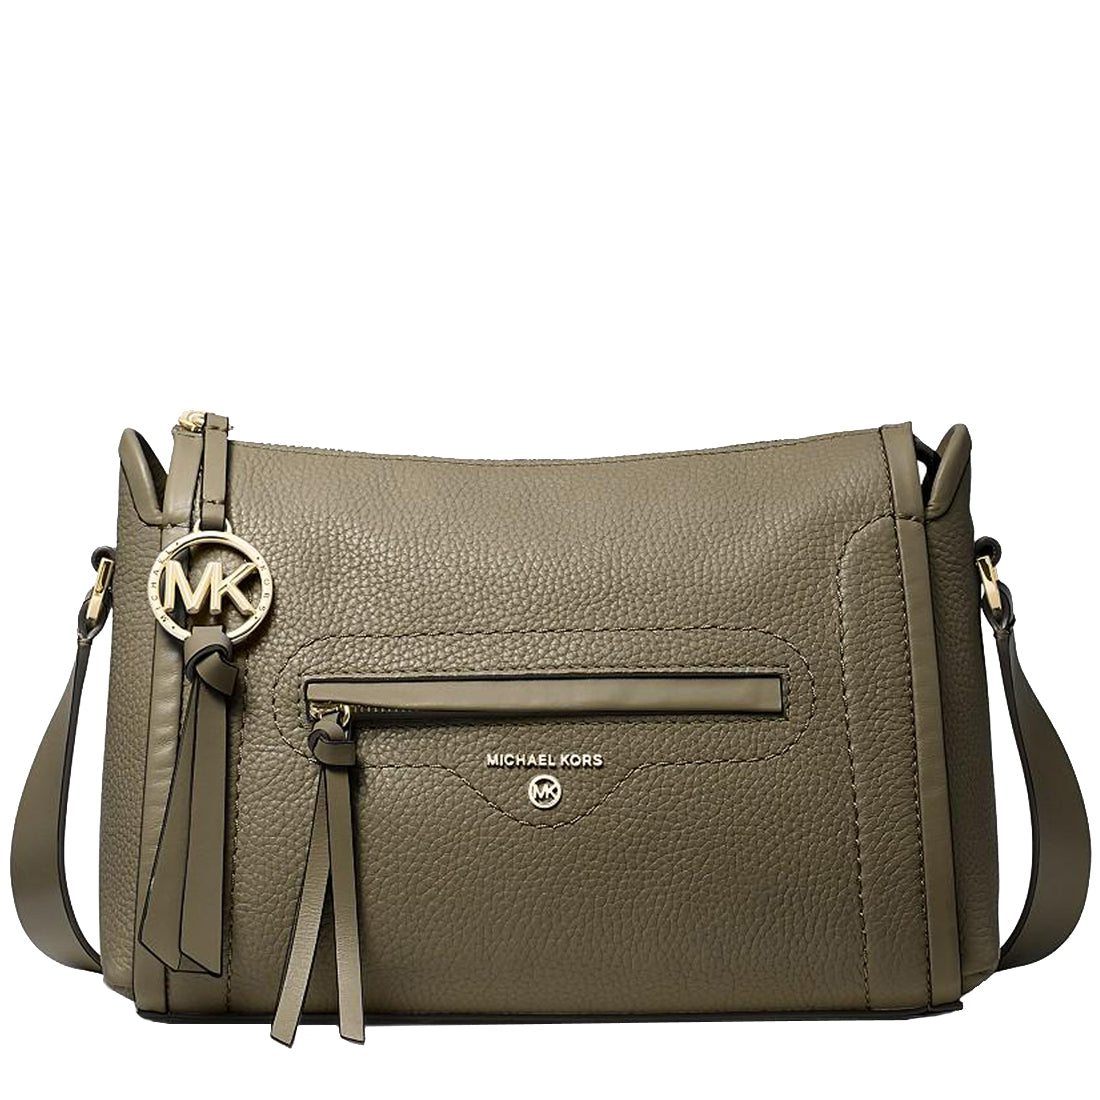 Michael Kors Carine Large Pebbled Leather Crossbody Bag in Army Green ...